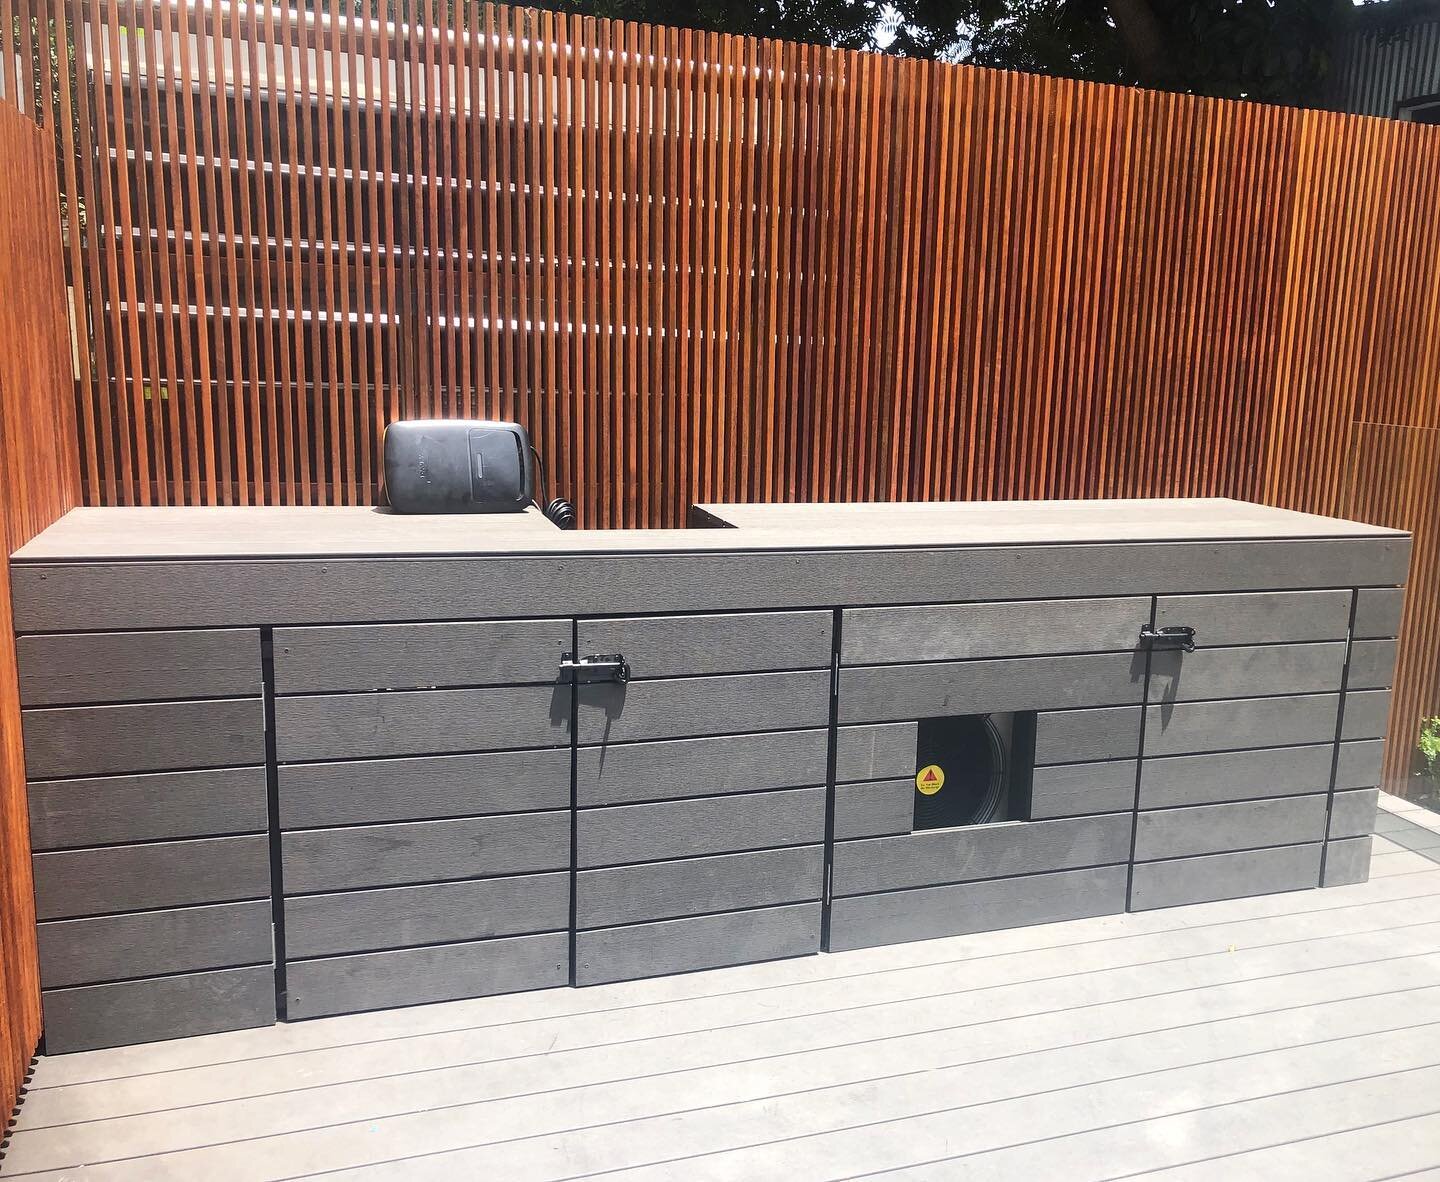 One of our recently completed projects in Marrickville.⁣
⁣
Our client wanted to conceal their existing pool pump to improve the aesthetic of their pool and backyard area. We constructed a timber frame and installed decking to cover the pool box as we